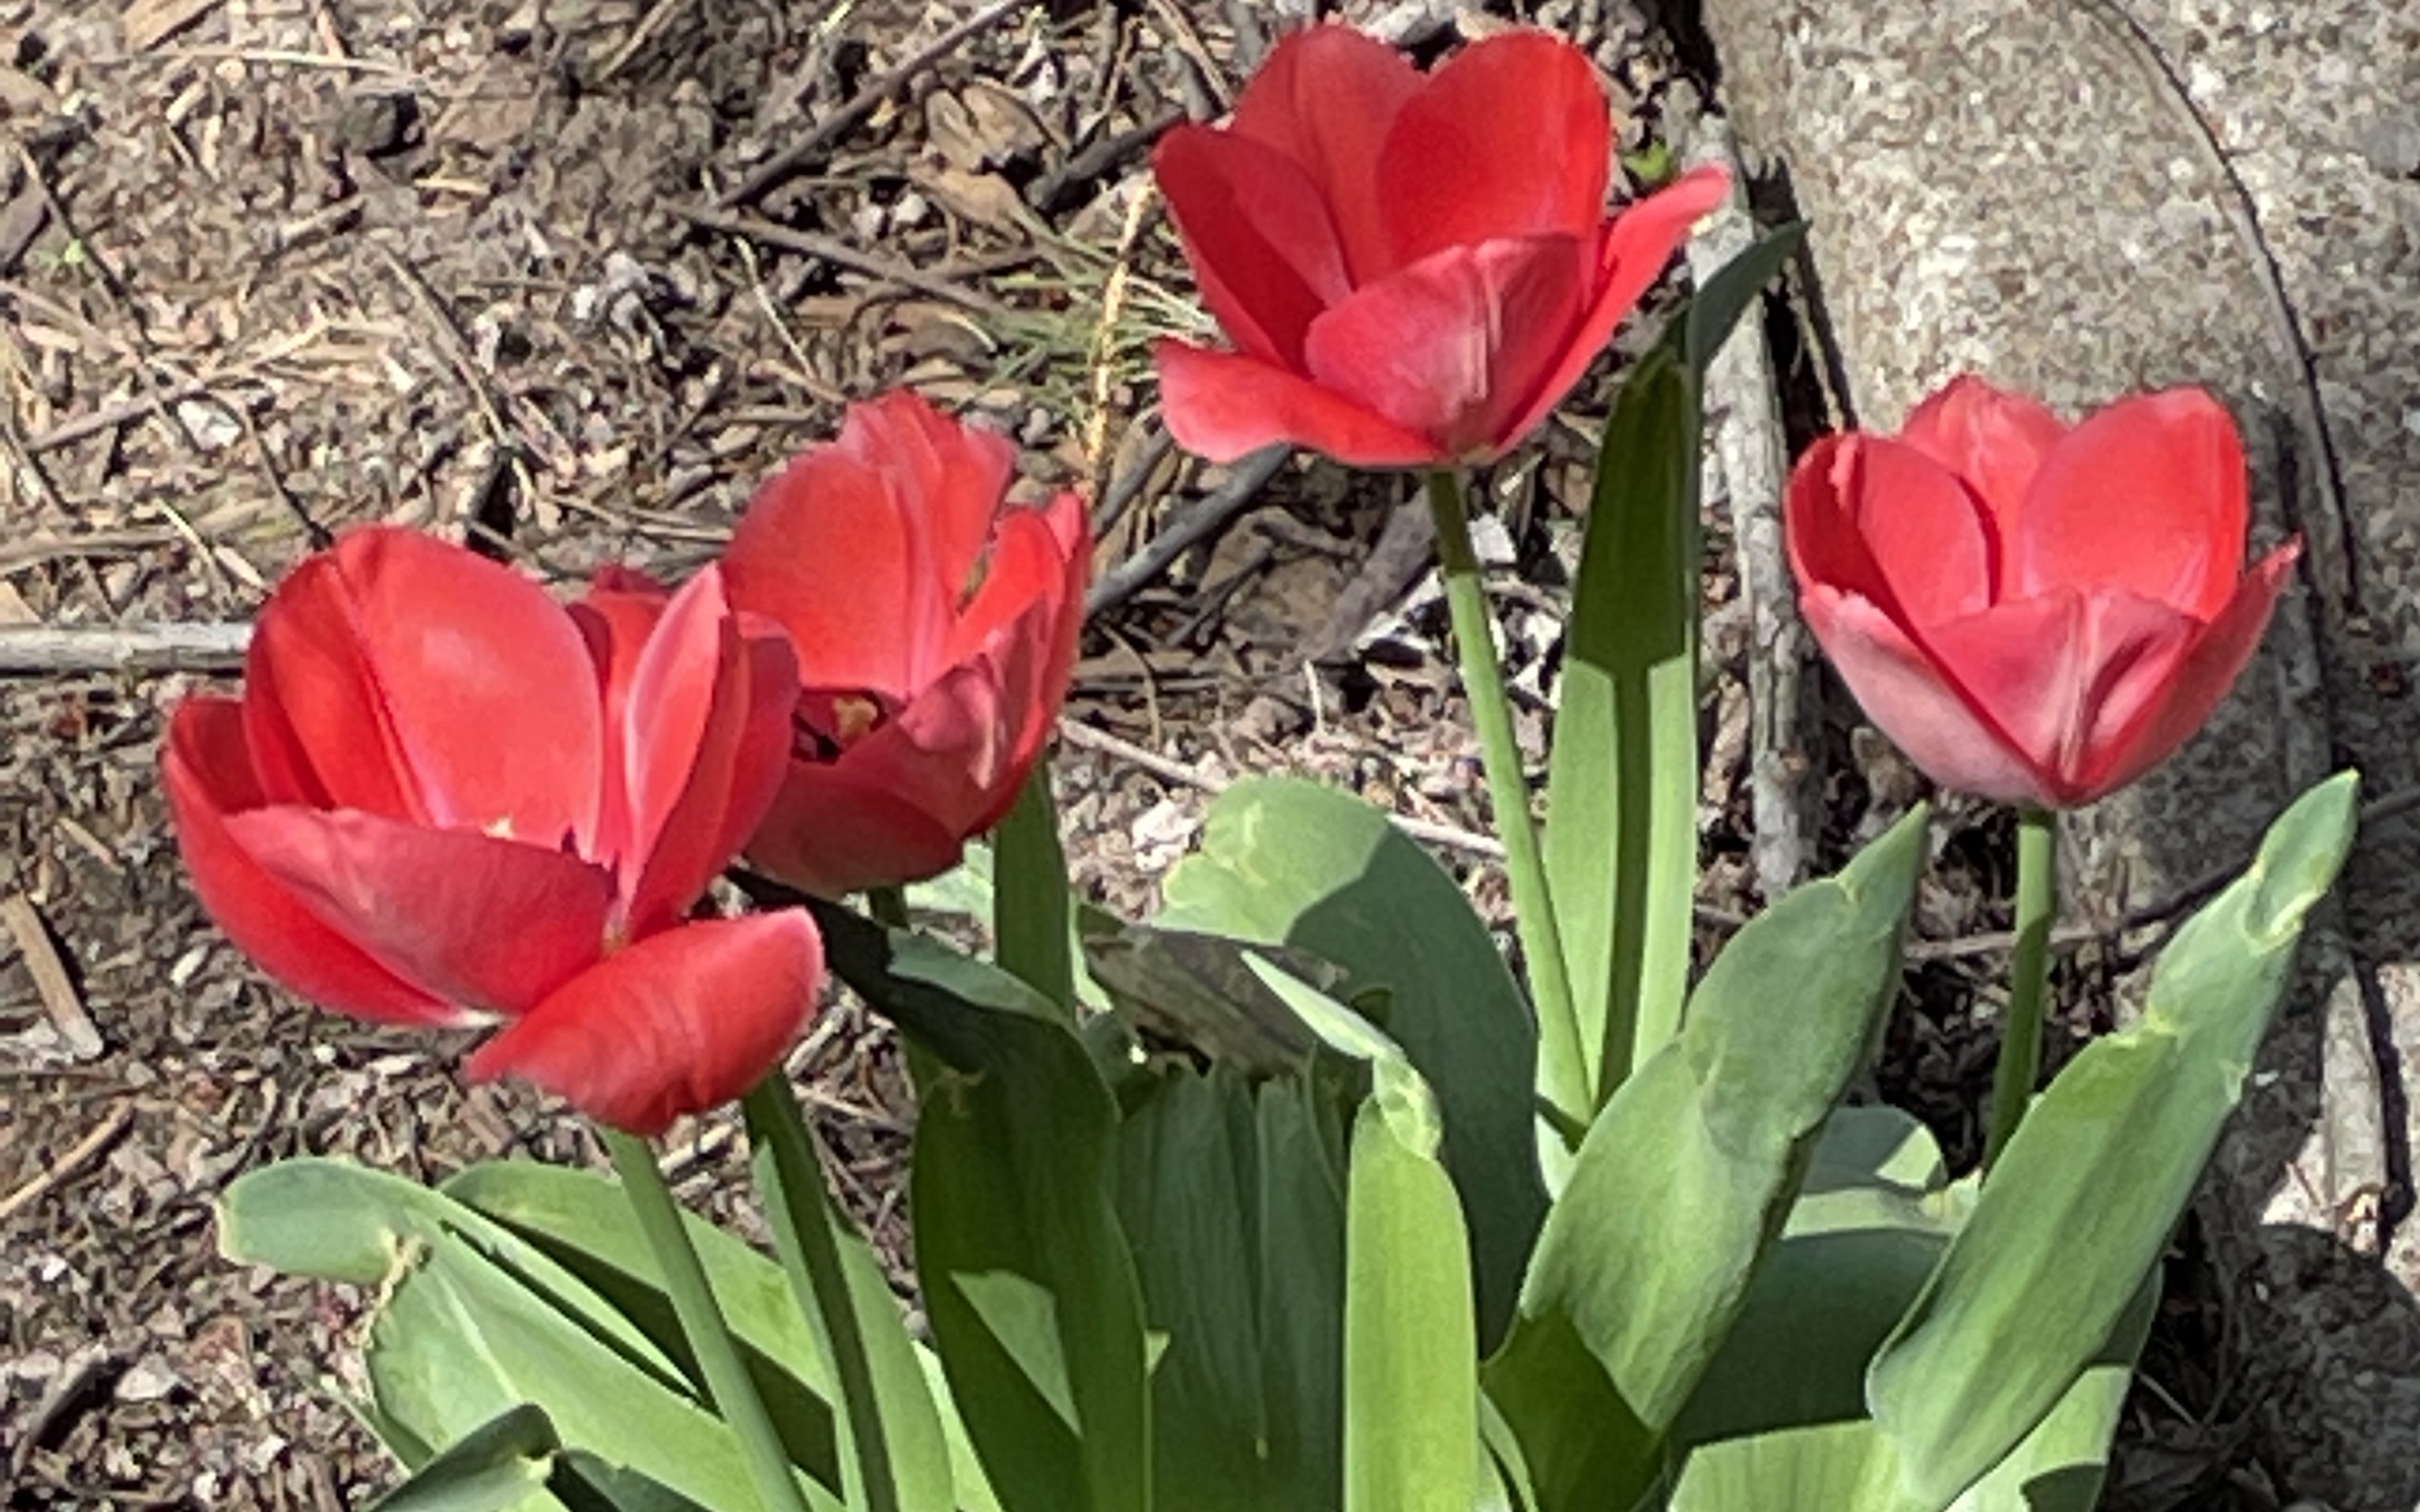 red tulips next to a stone against a field of brown mulch